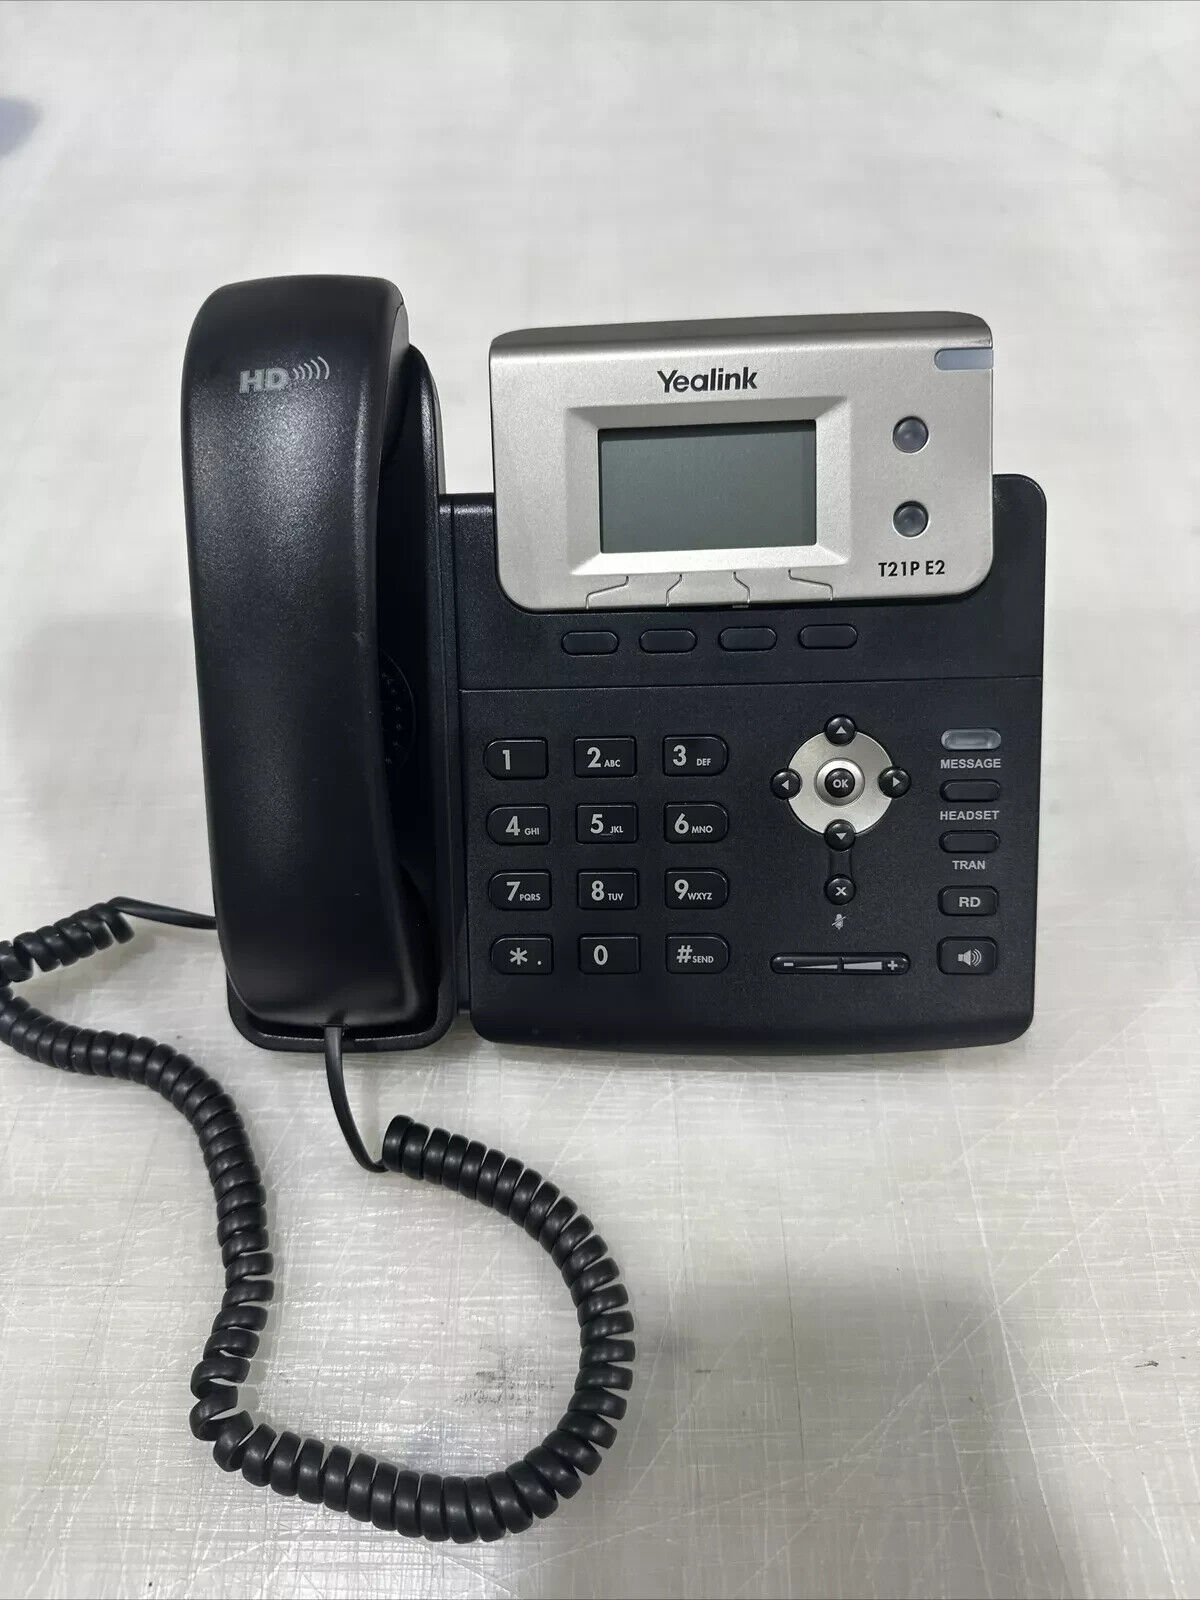 Yealink SIP-T21P E2 VoIP IP Phone with Stand and Power Cord Warranty Tested